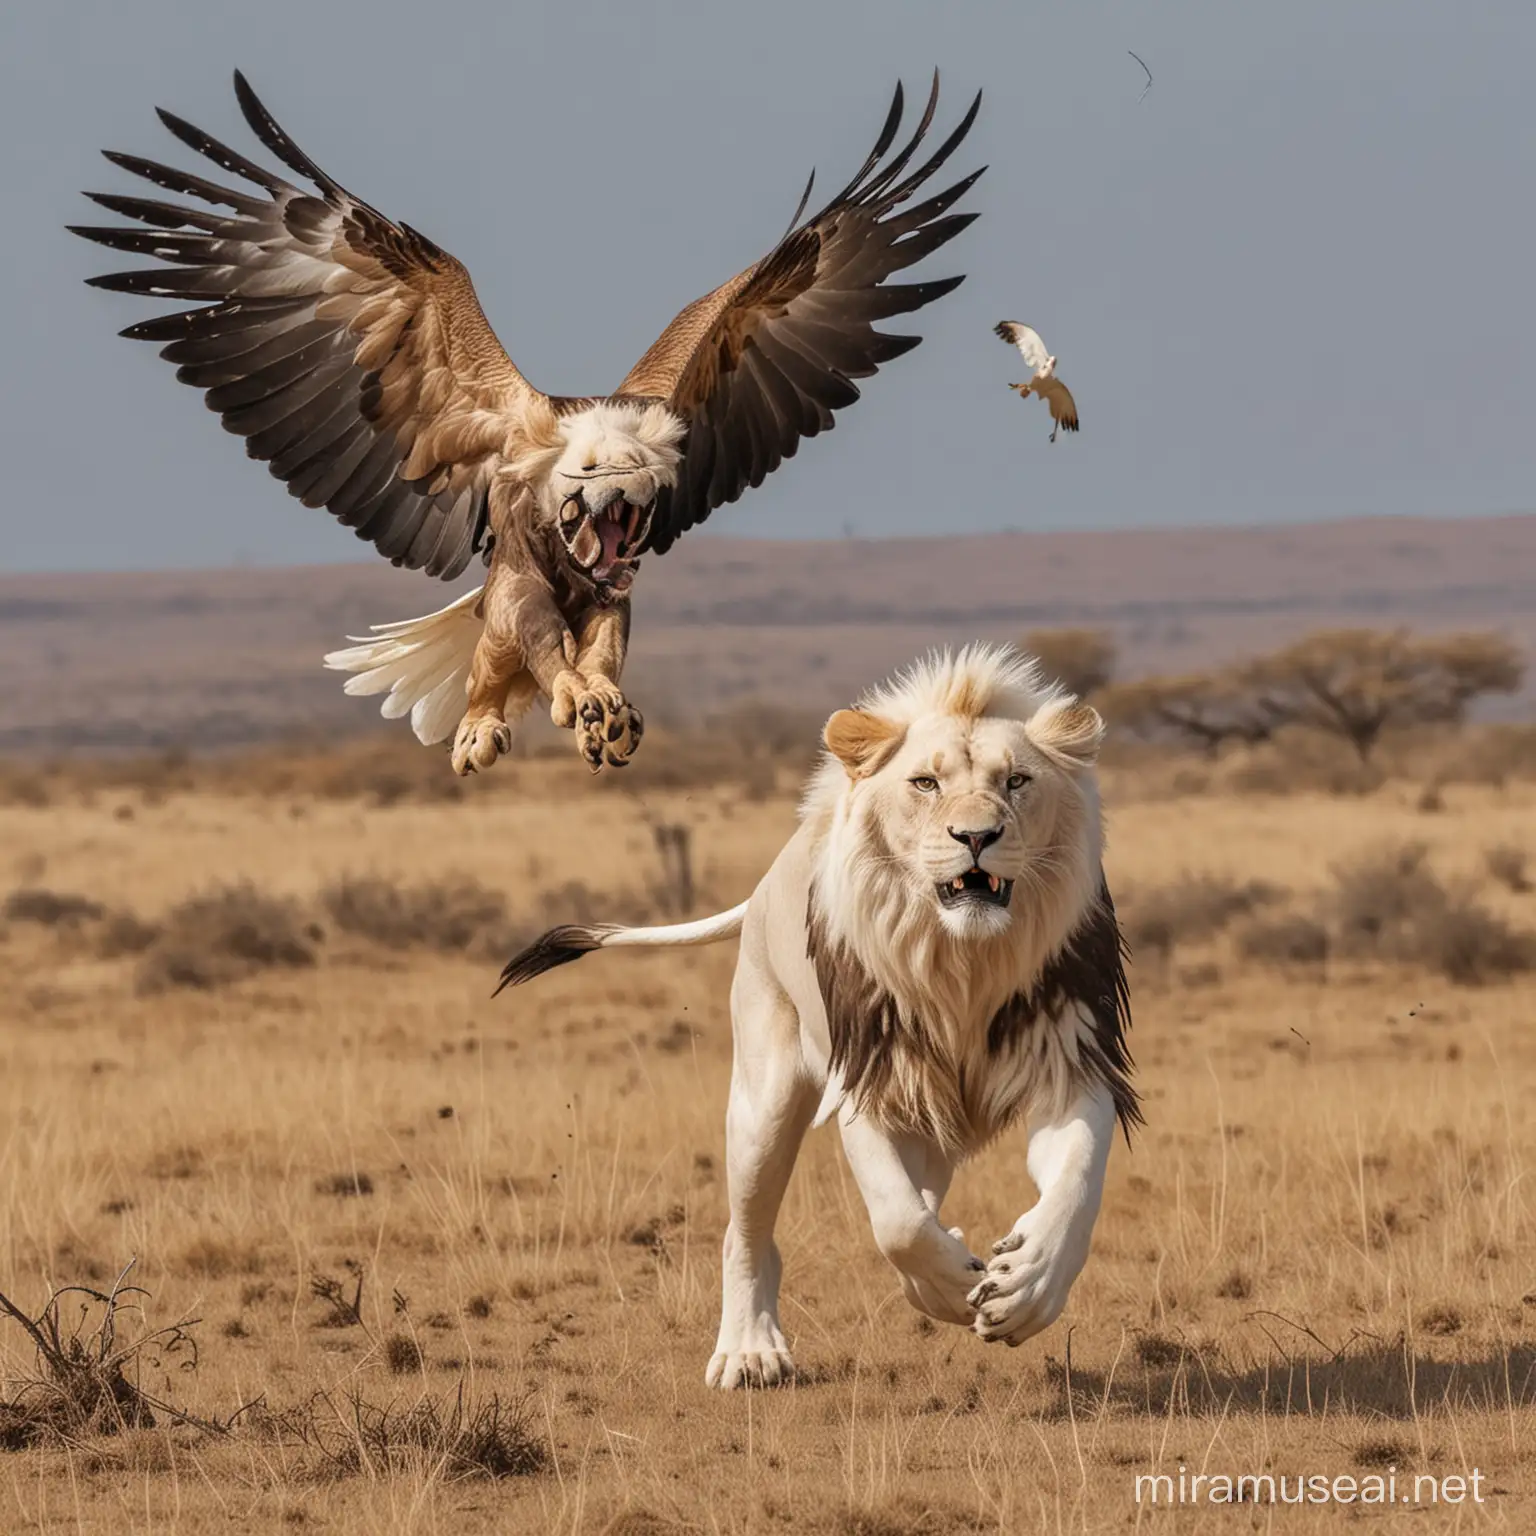 Intense Eagle Chase Fearful White Lion Under Attack